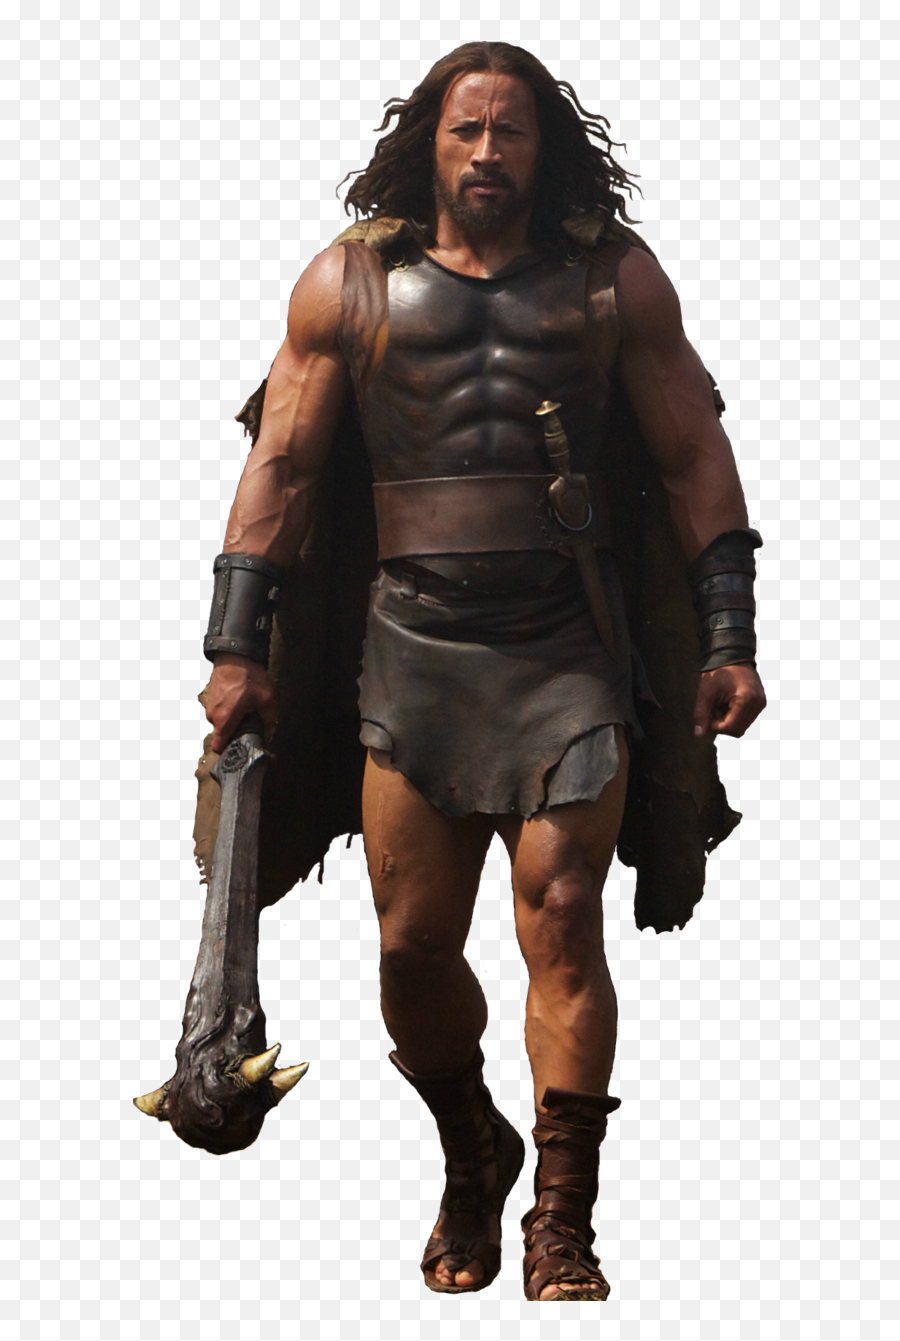 Png Image With Transparent Background - Hercules Dwayne Johnson Png,Hercules Png